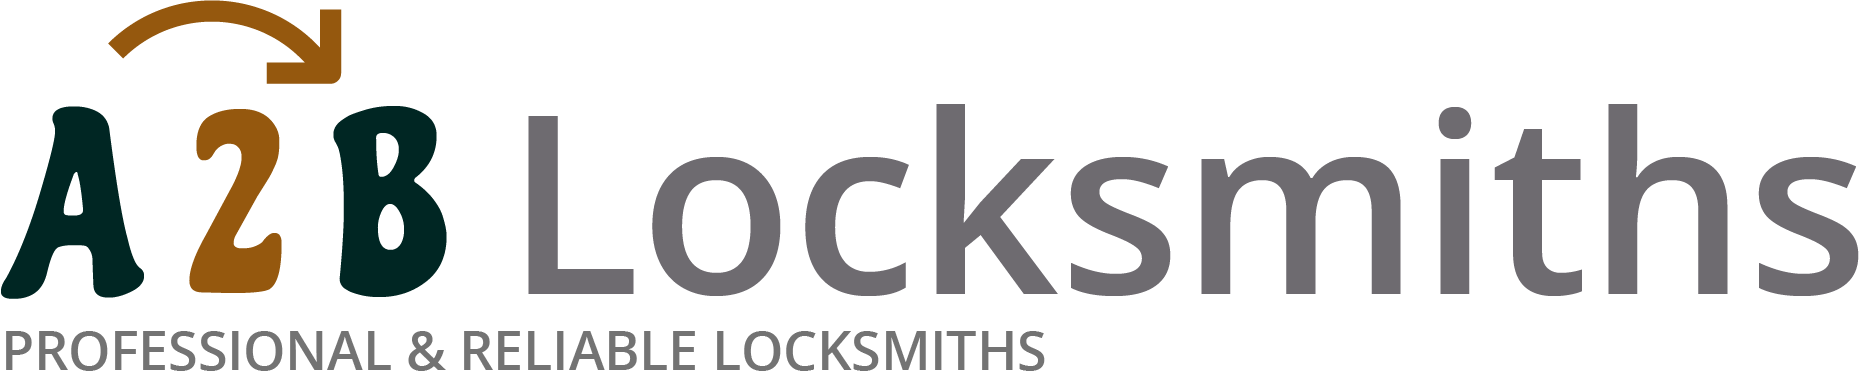 If you are locked out of house in Droylsden, our 24/7 local emergency locksmith services can help you.